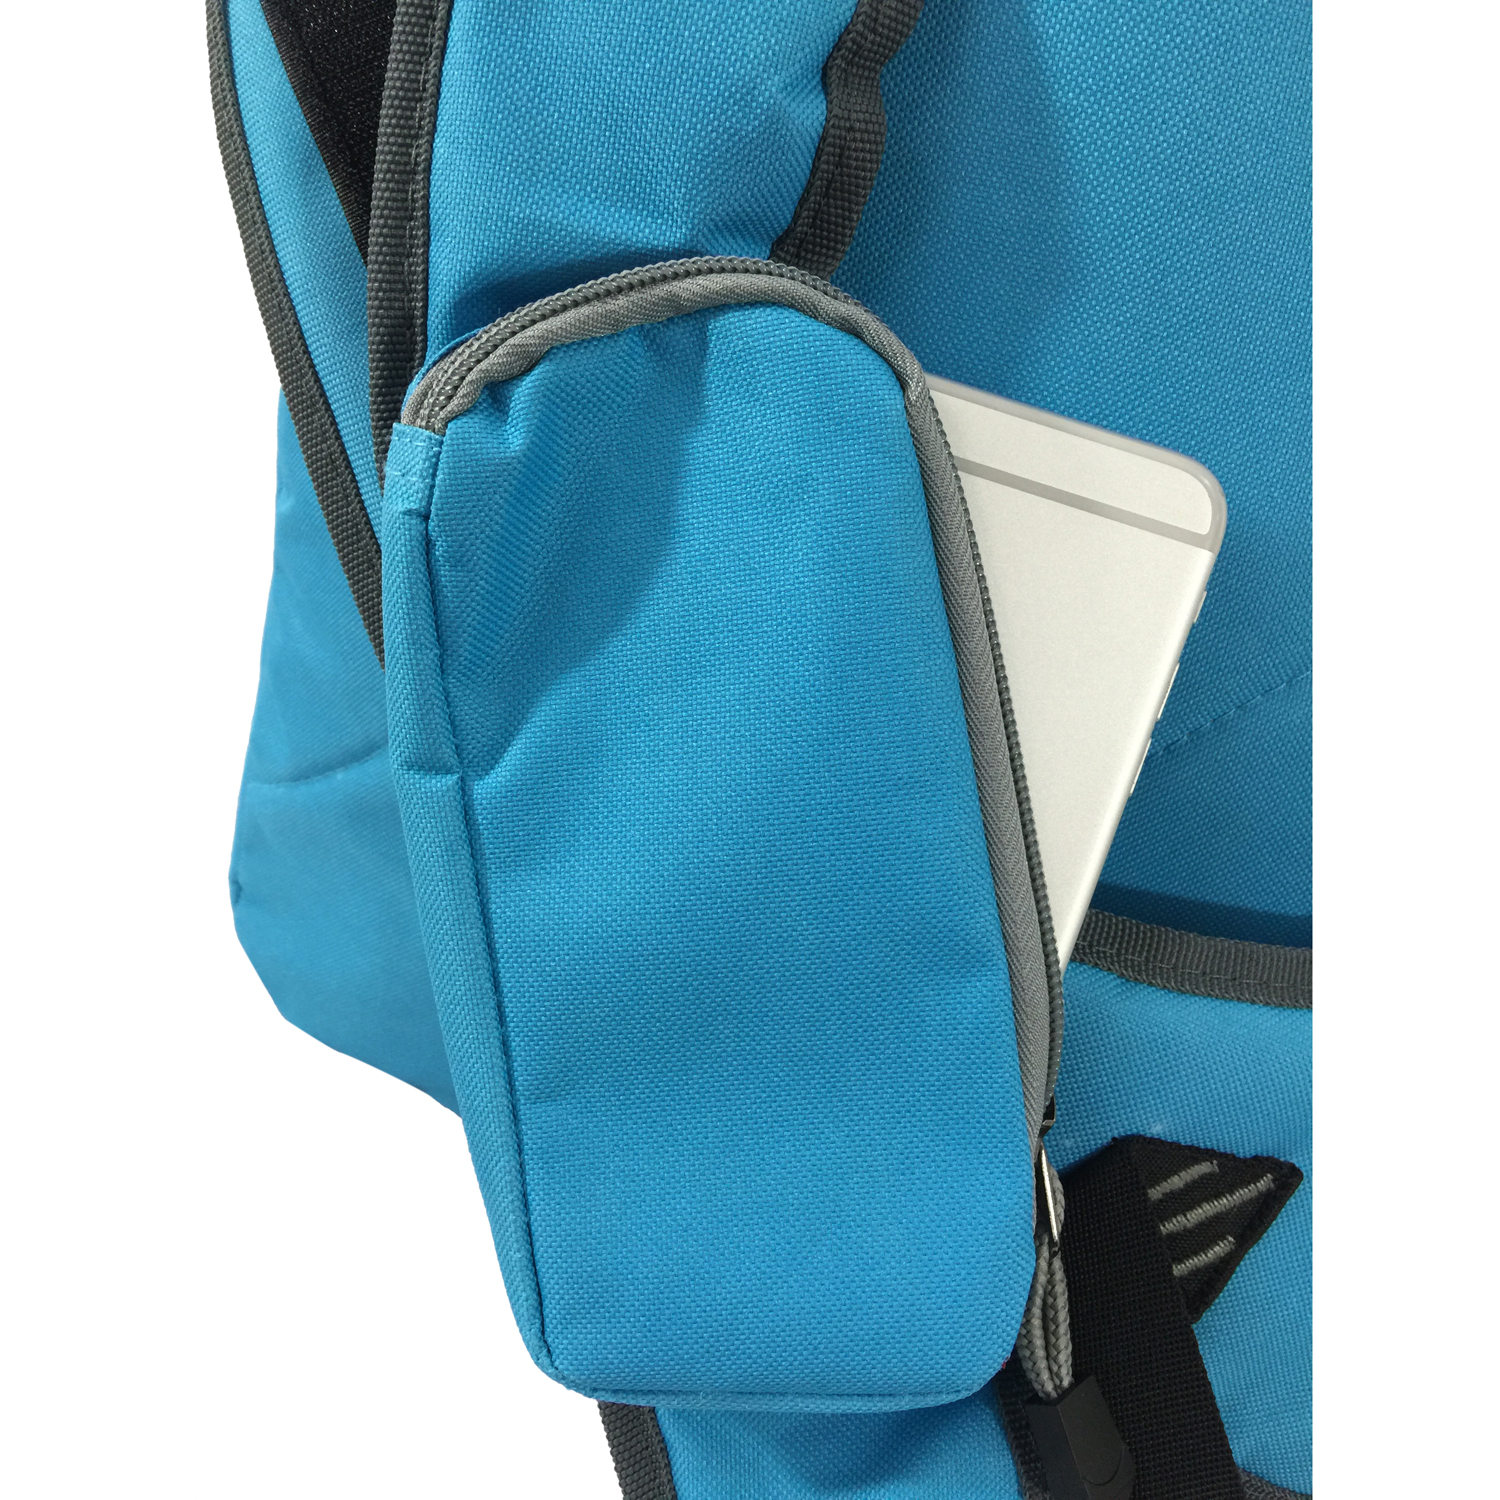 K-Cliffs Large 20 inch Unisex Reflective Sling School Backpack Bright Blue, Travel Daypack , Teen-Adult - image 4 of 5